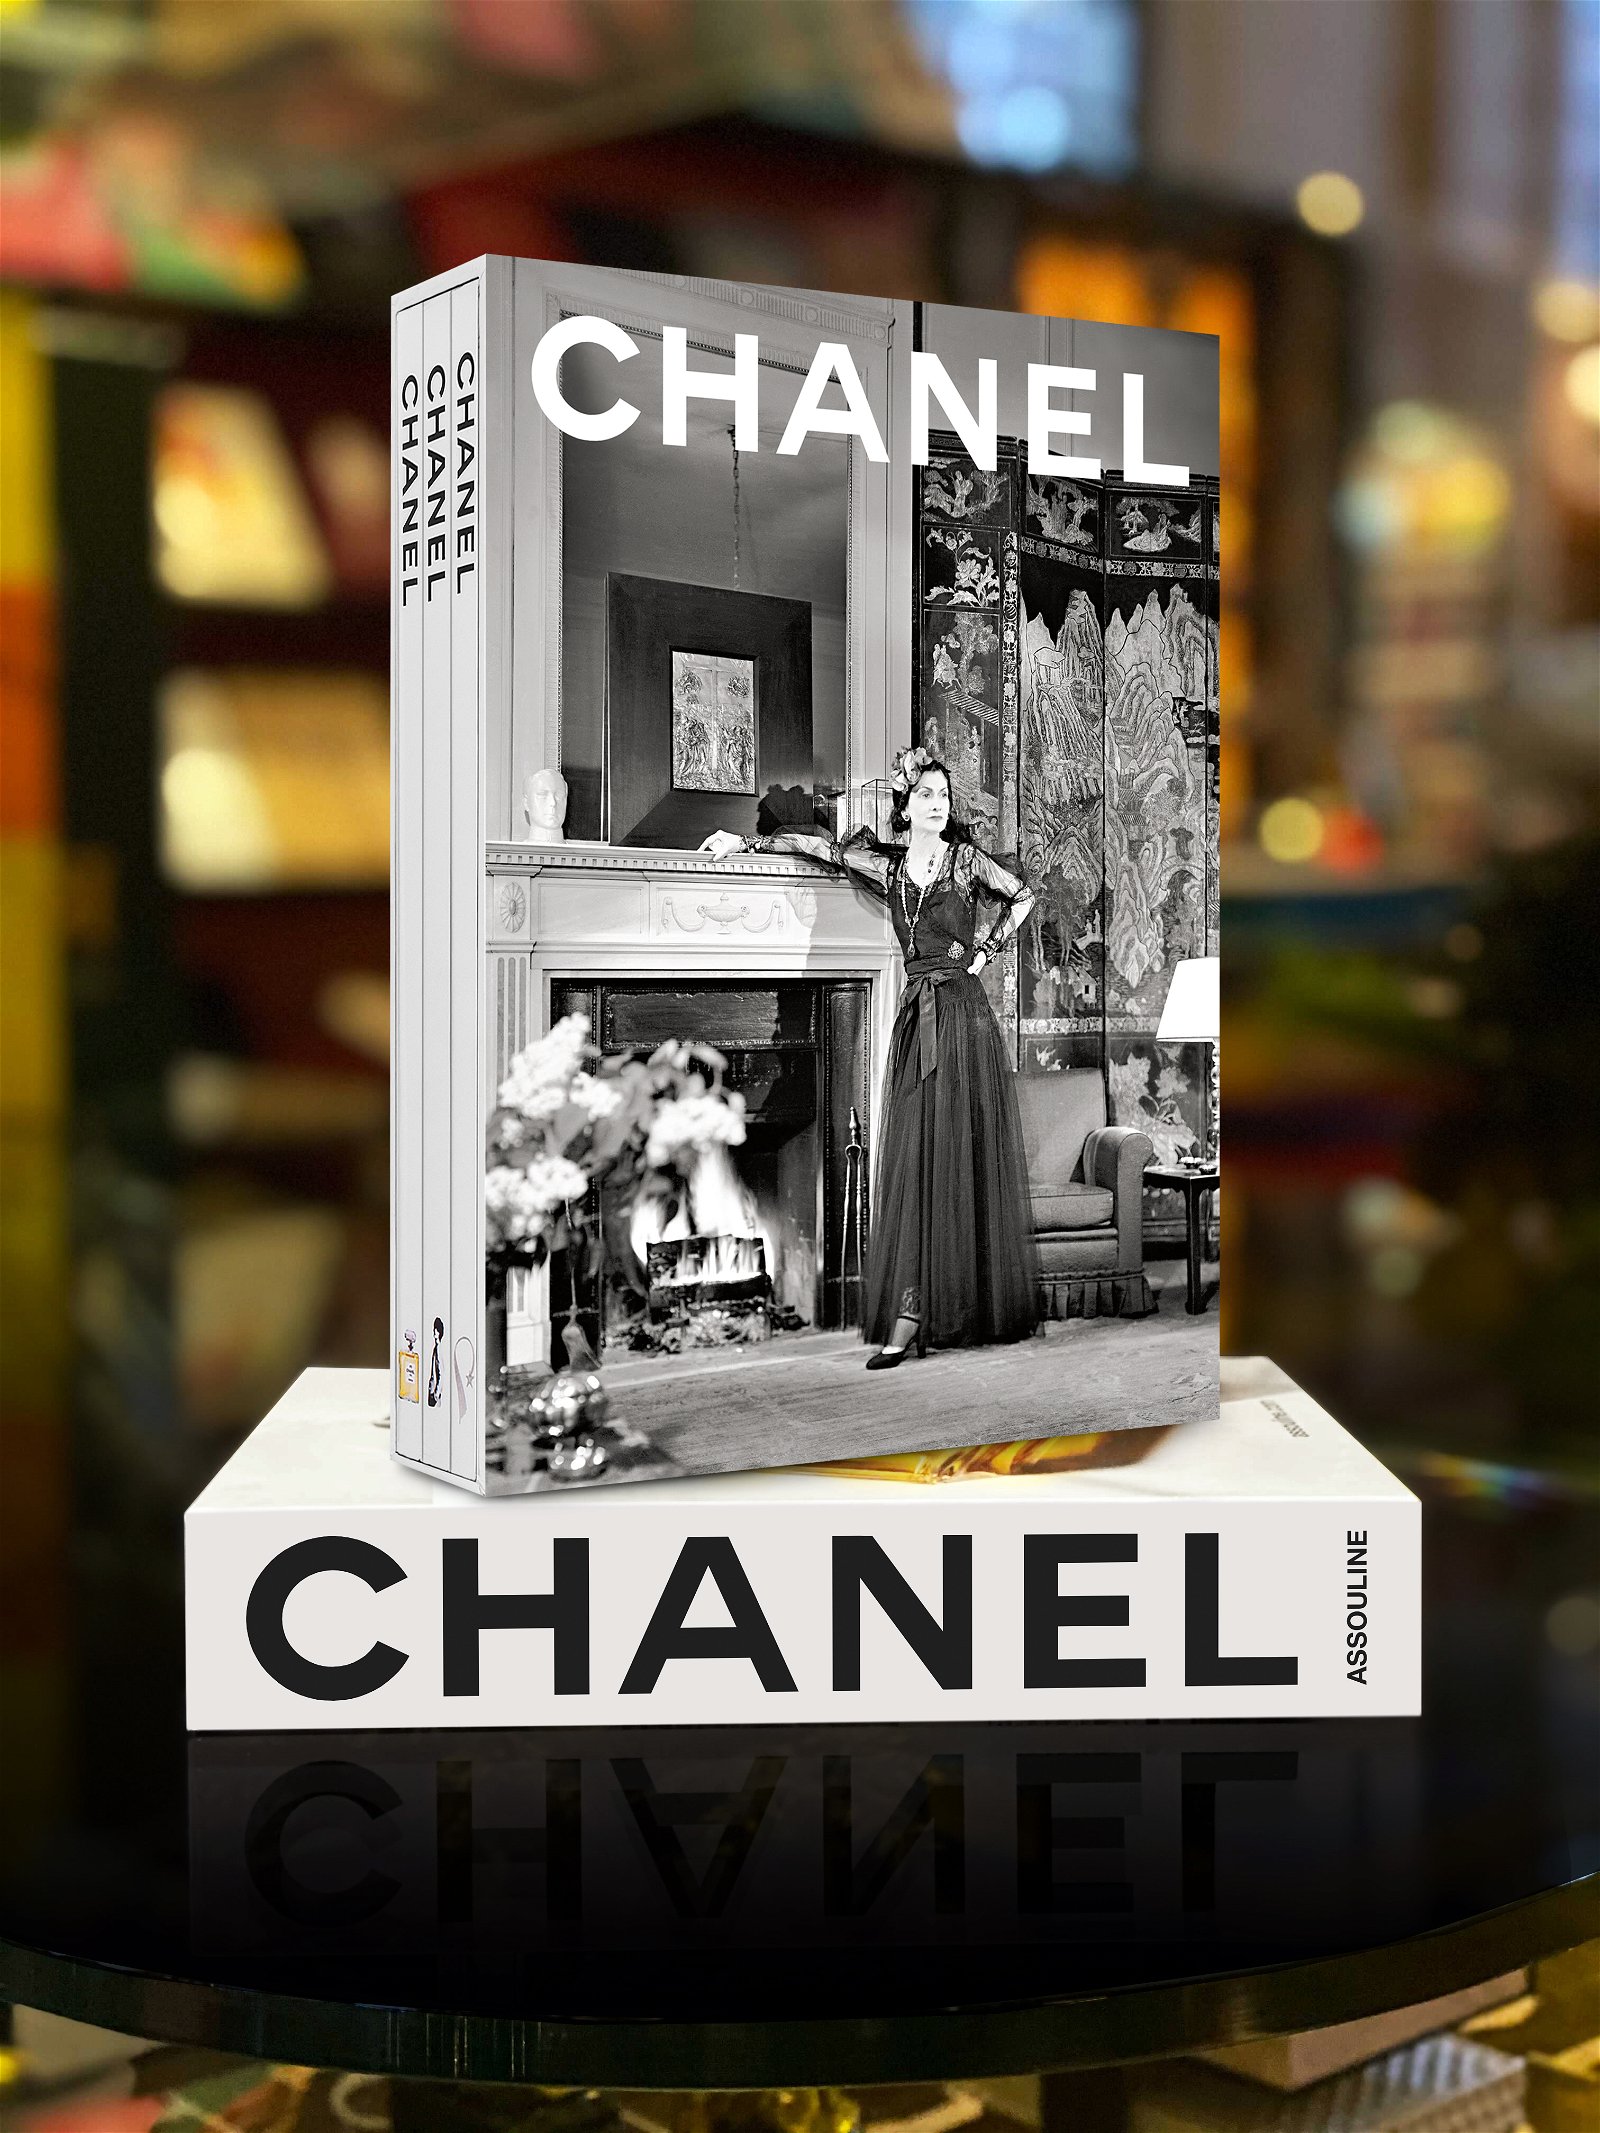 Assouline: Get the Much-Awaited New Edition of the Chanel 3-Book